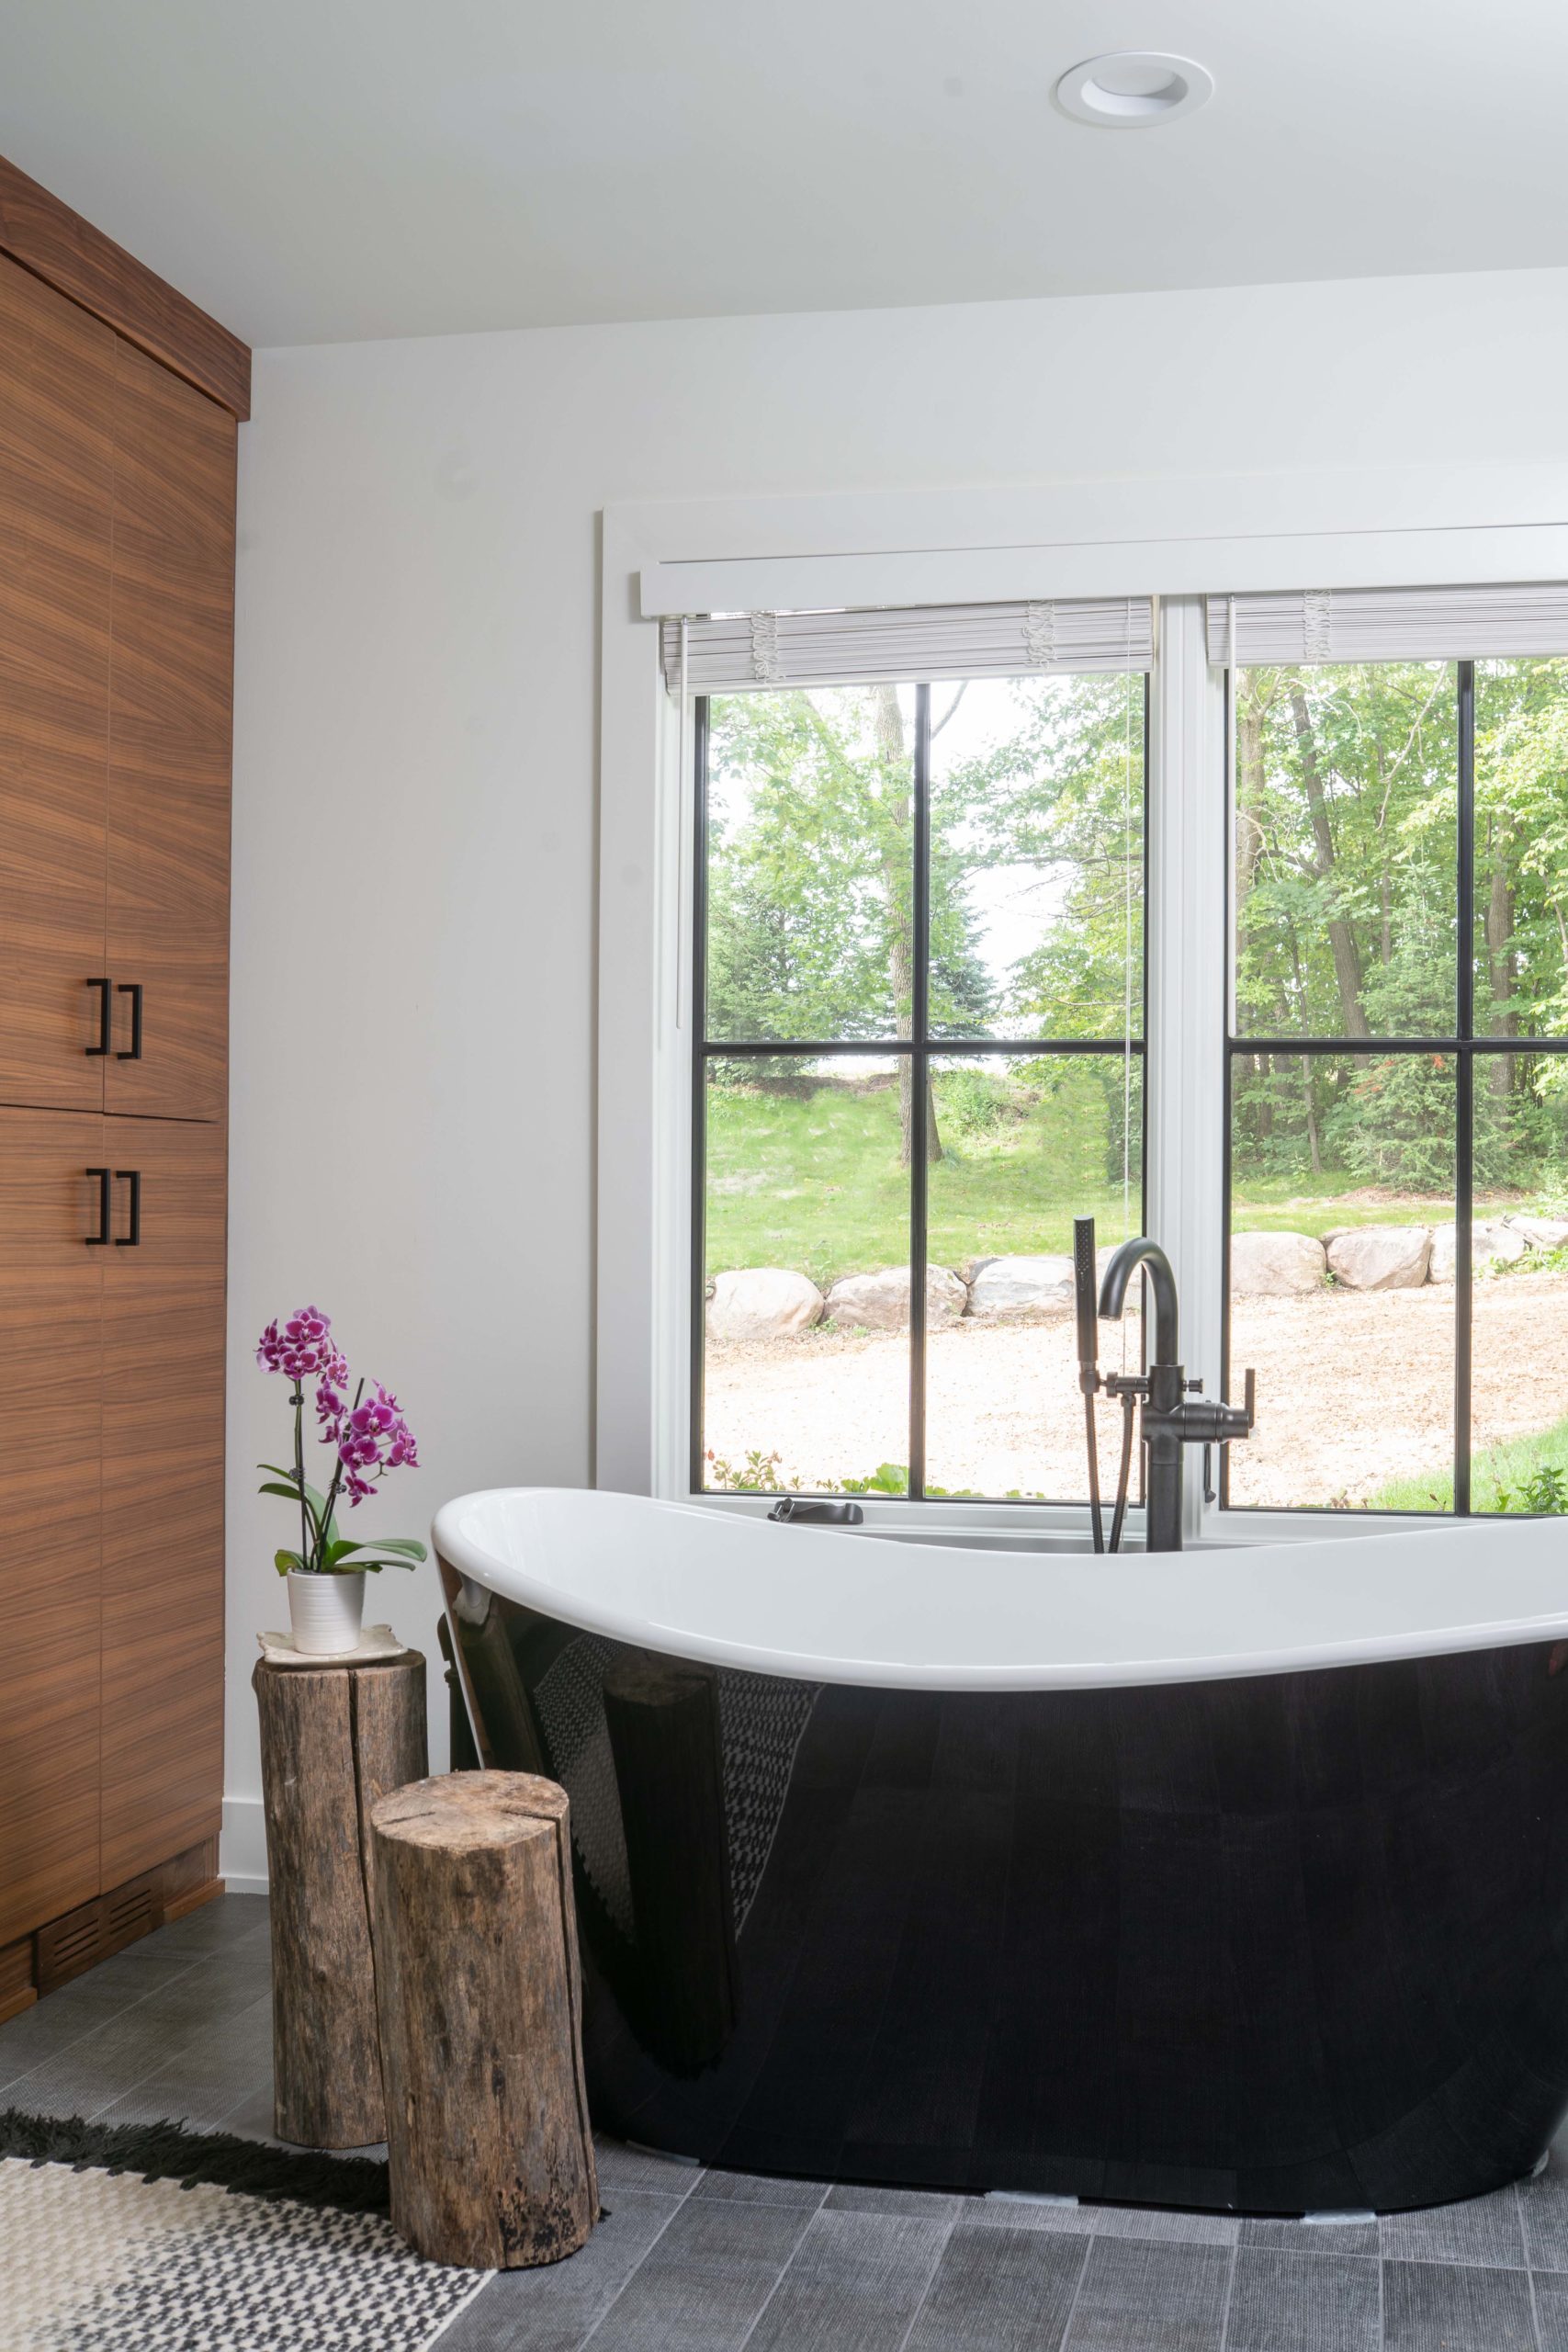 A bathroom with a black tub and a window, featured in the Kitchens portfolio.